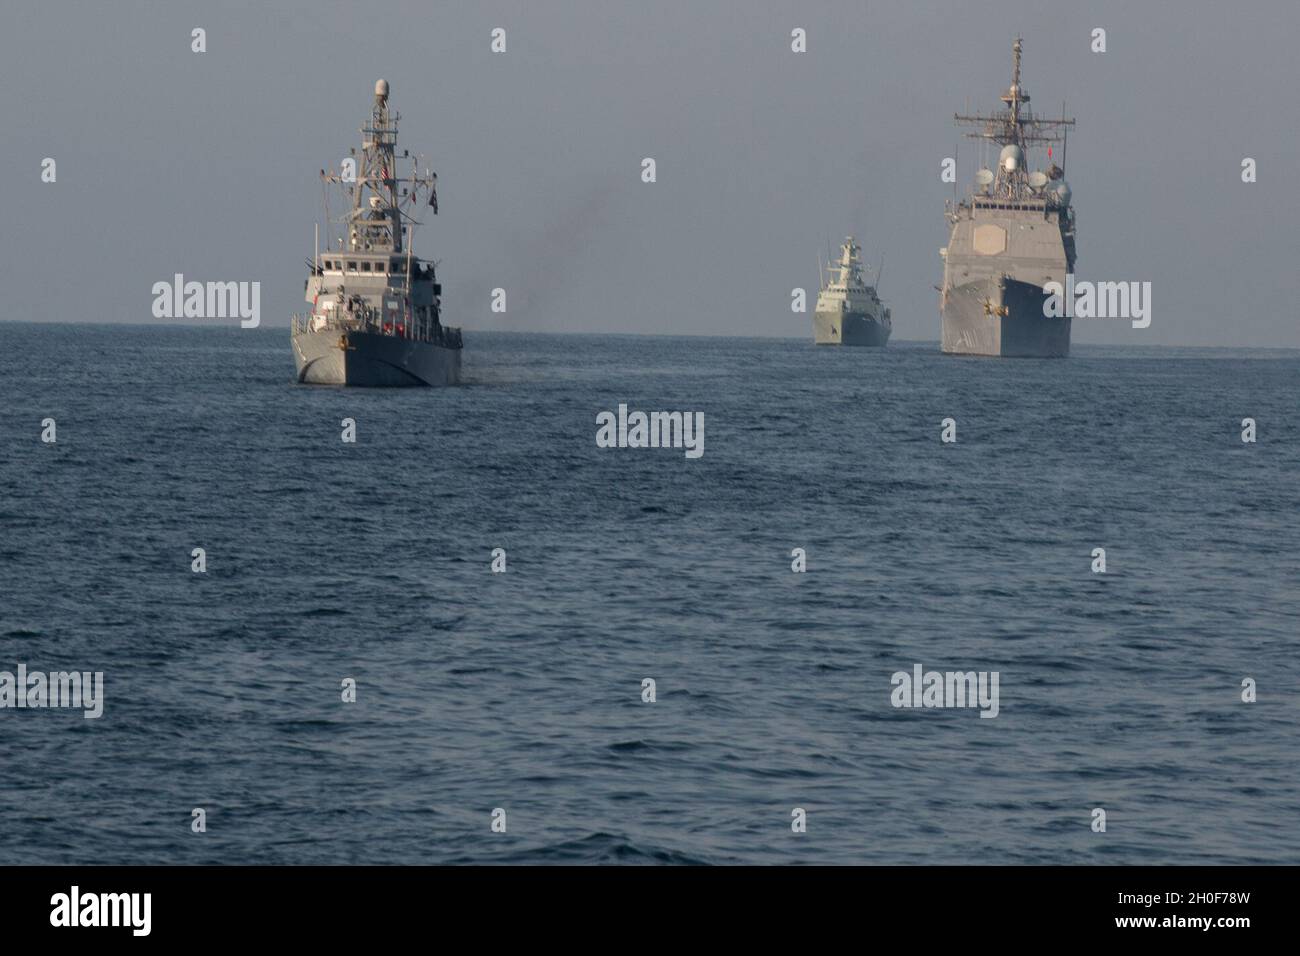 210222-A-BD272-0689 SEA OF OMAN (Feb. 22, 2021) – Patrol coastal ship USS Thunderbolt (PC 12), left, guided-missile cruiser USS Port Royal (CG 73), right, and corvette RNOV Al Rasikh (Q 42)  sail in formation during coalition exercise Khunjar Hadd 26 in the Sea of Oman, Feb. 22. Khunjar Hadd 26 is an annual exercise meant to enhance mutual maritime capabilities and interoperability between the U.S., Omani, French and United Kingdom military forces in order to address threats to freedom of navigation and the free flow of international commerce. Stock Photo